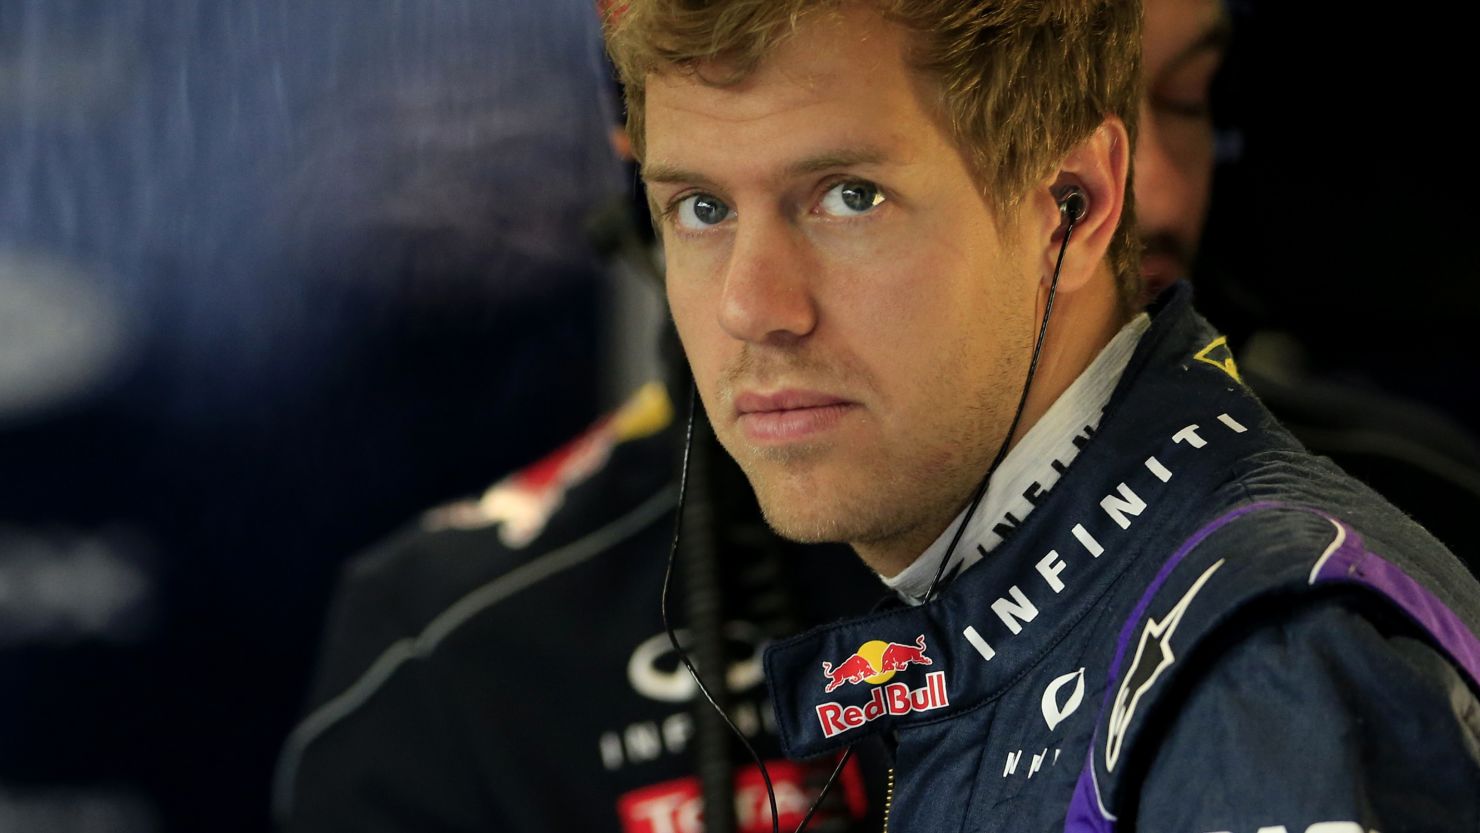 Sebastian Vettel was forced to withdraw from last weekend's British GP due to gearbox problems.